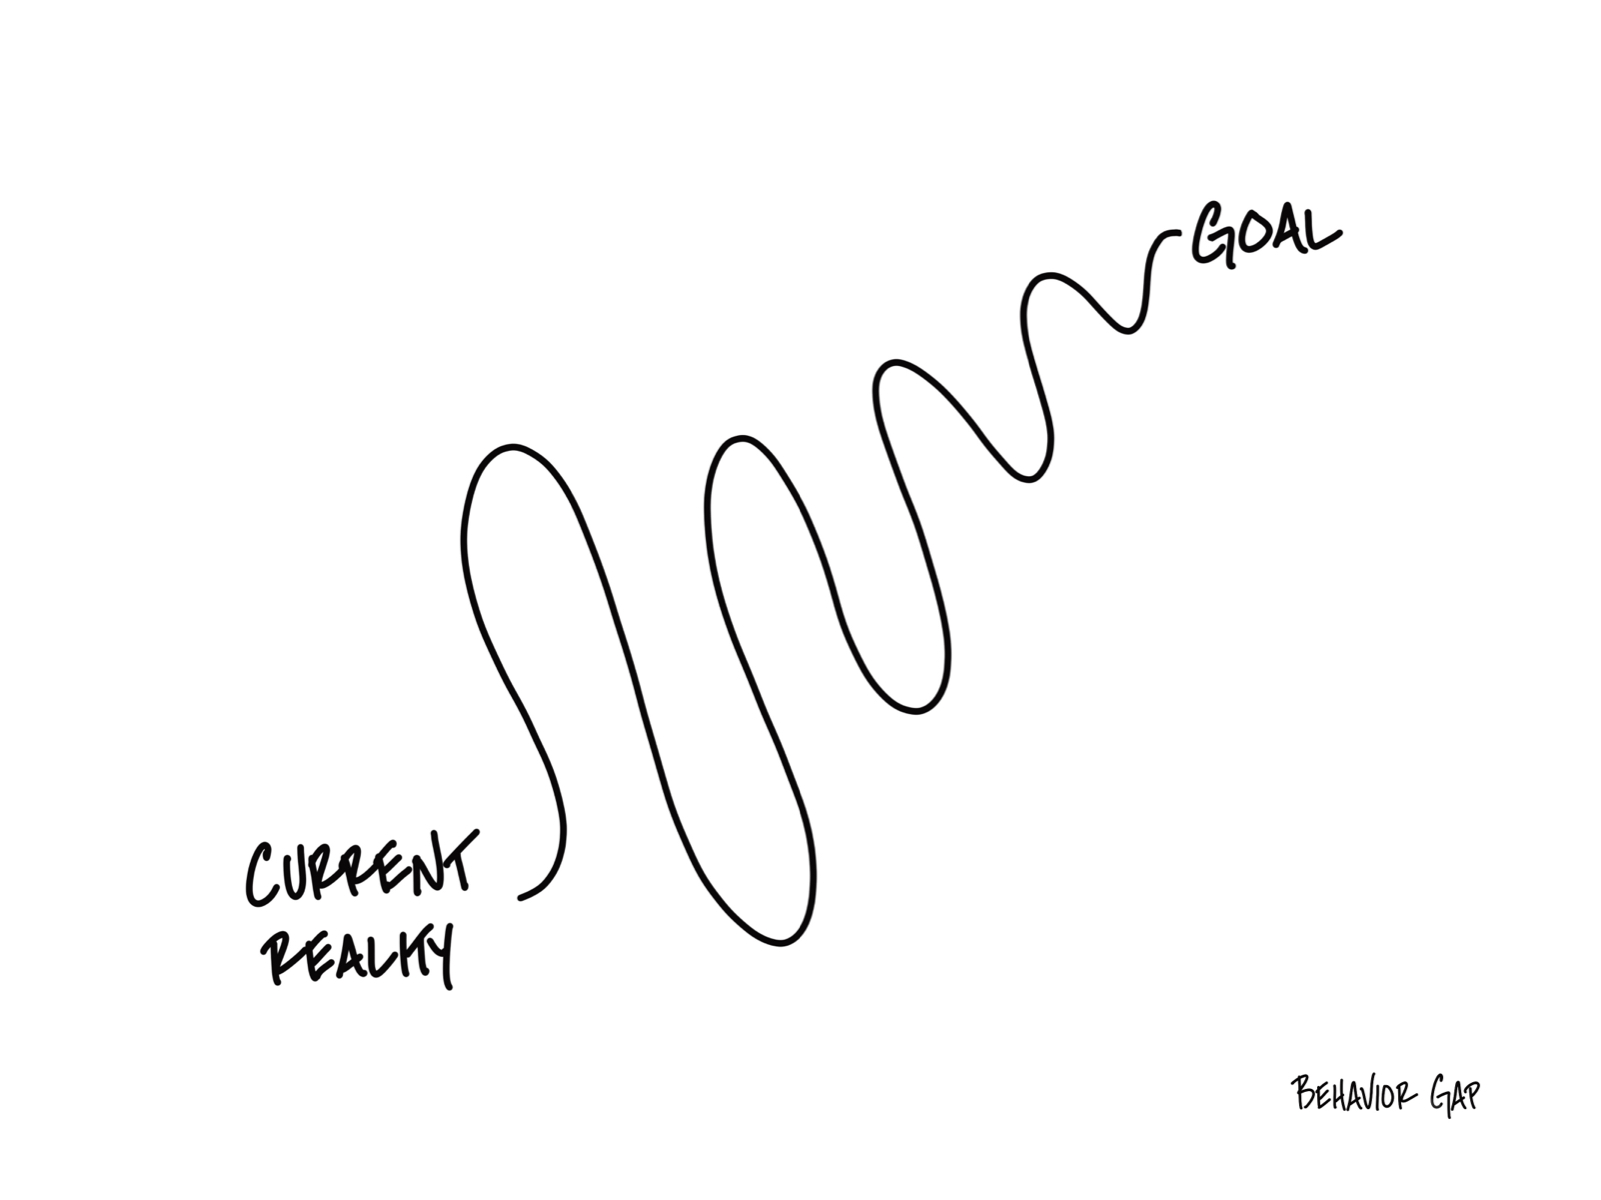 Curvey line from reality to goal